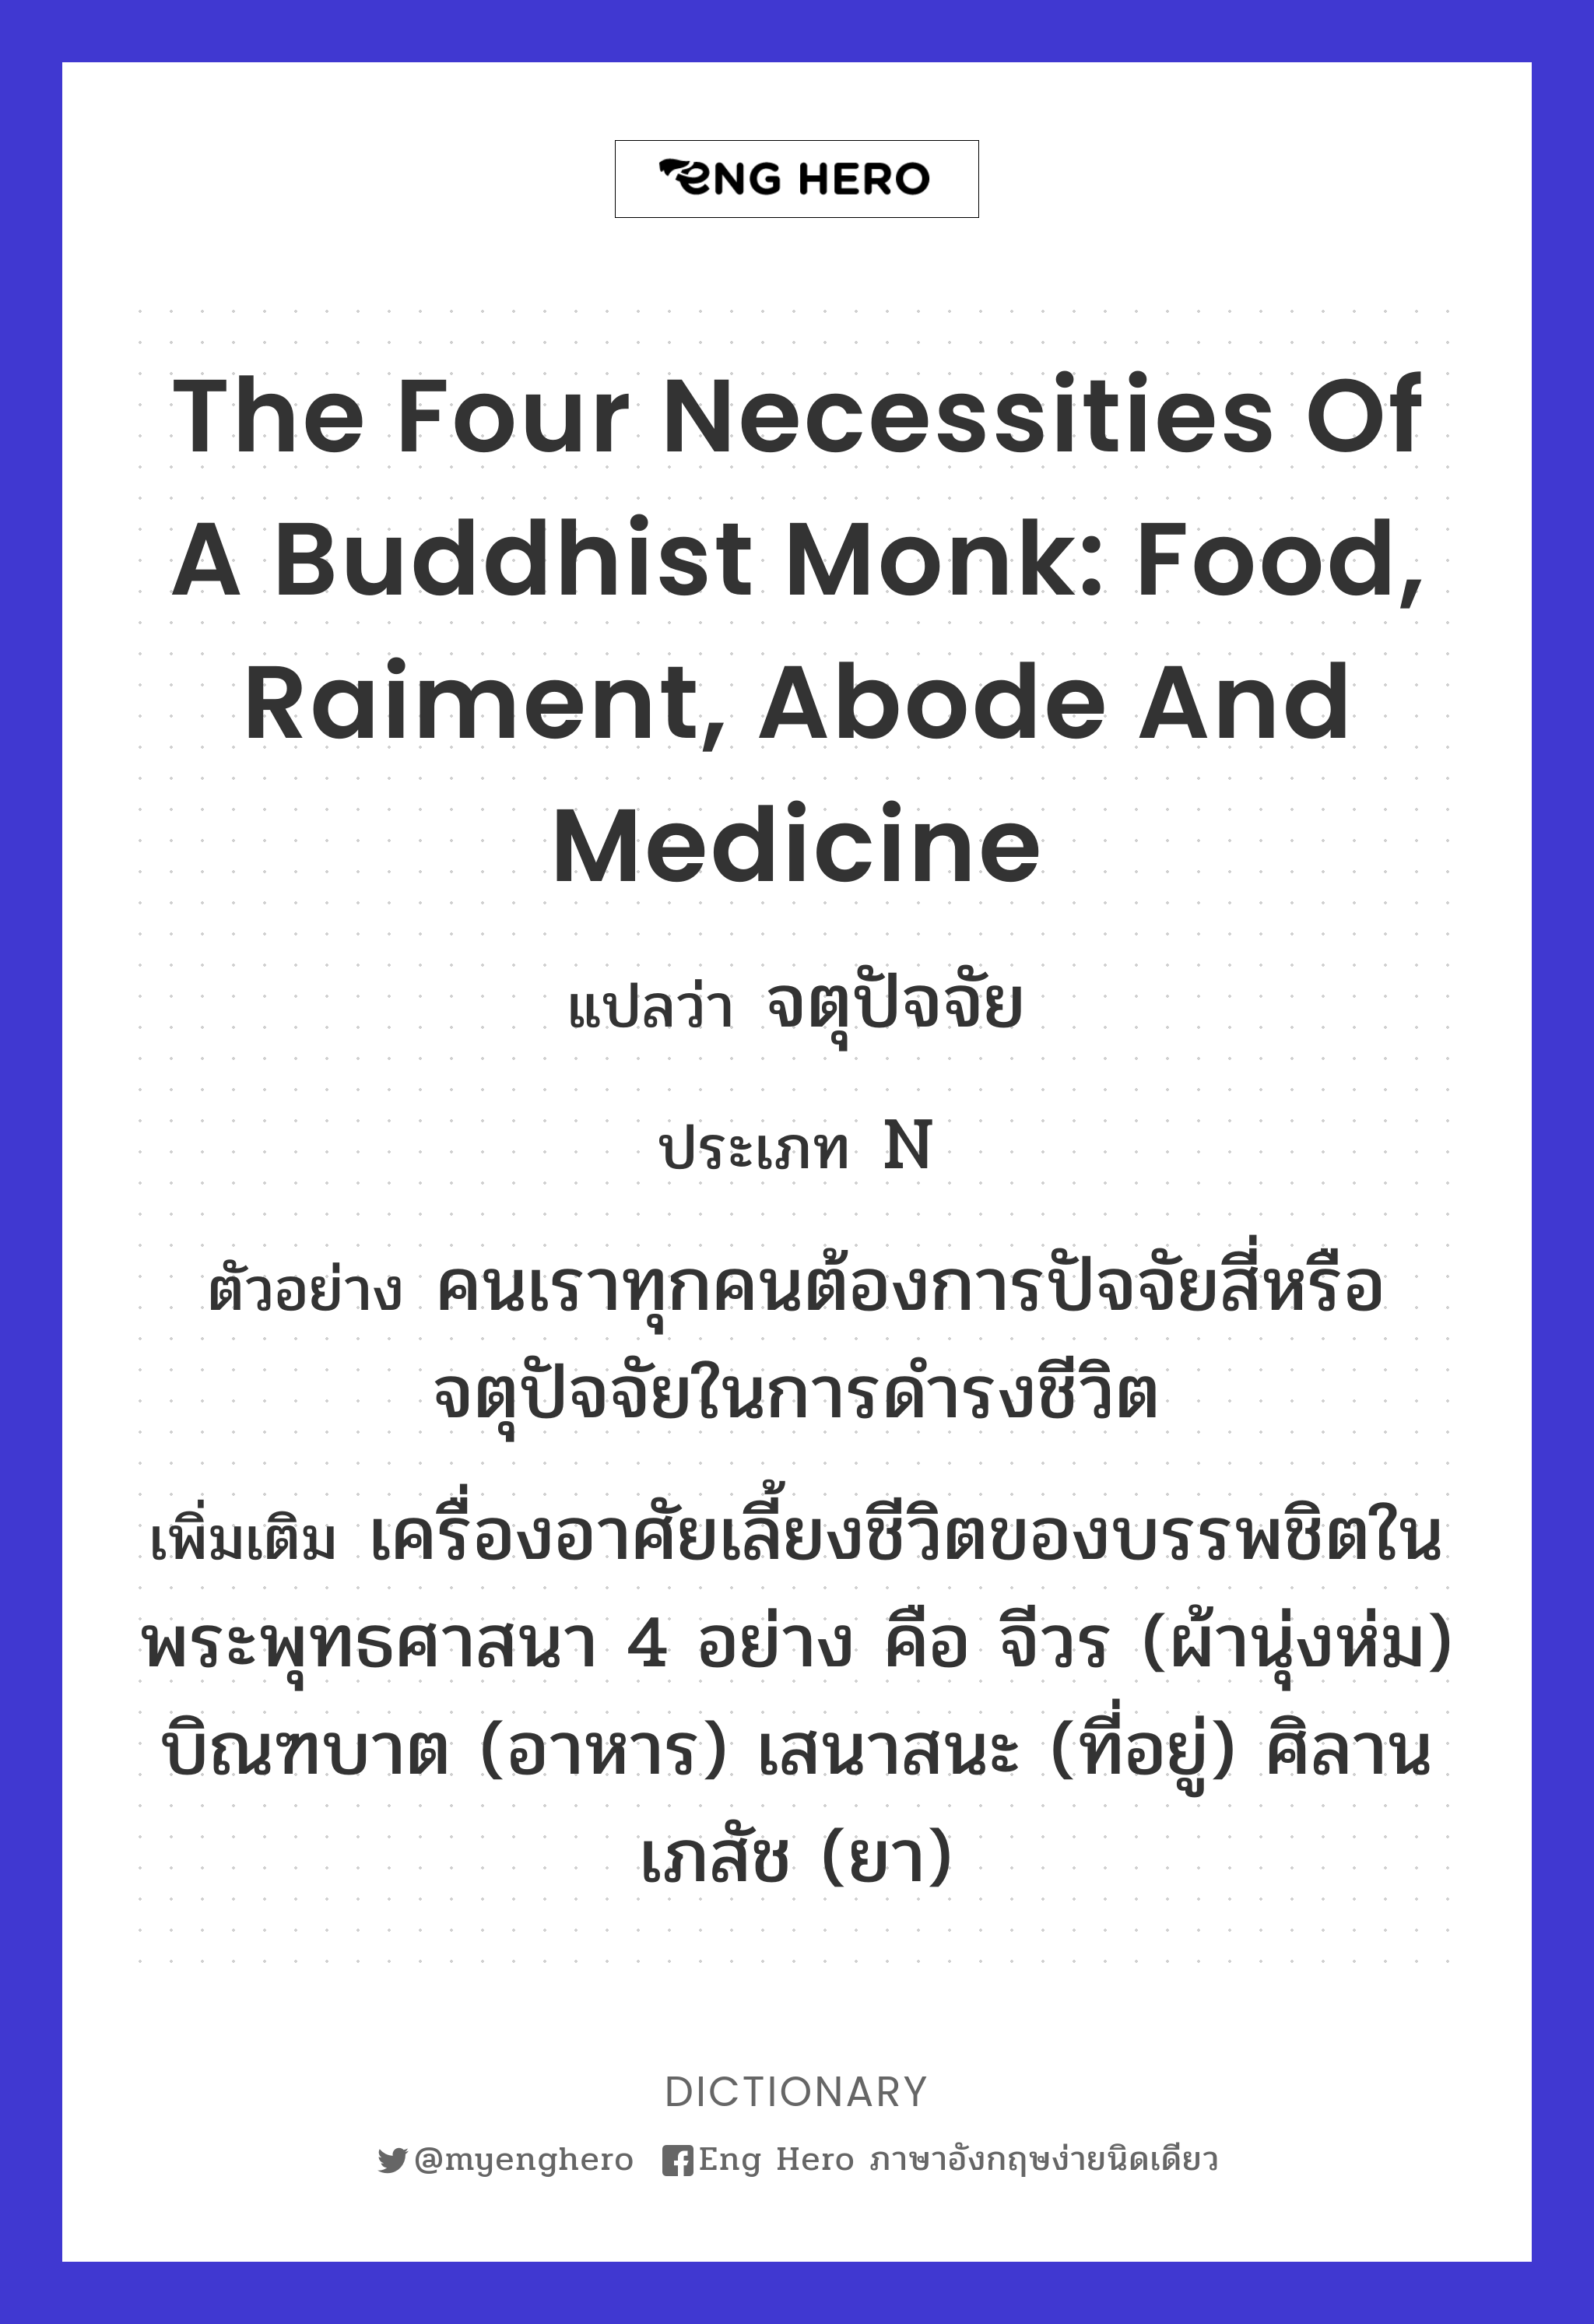 the four necessities of a Buddhist monk: food, raiment, abode and medicine